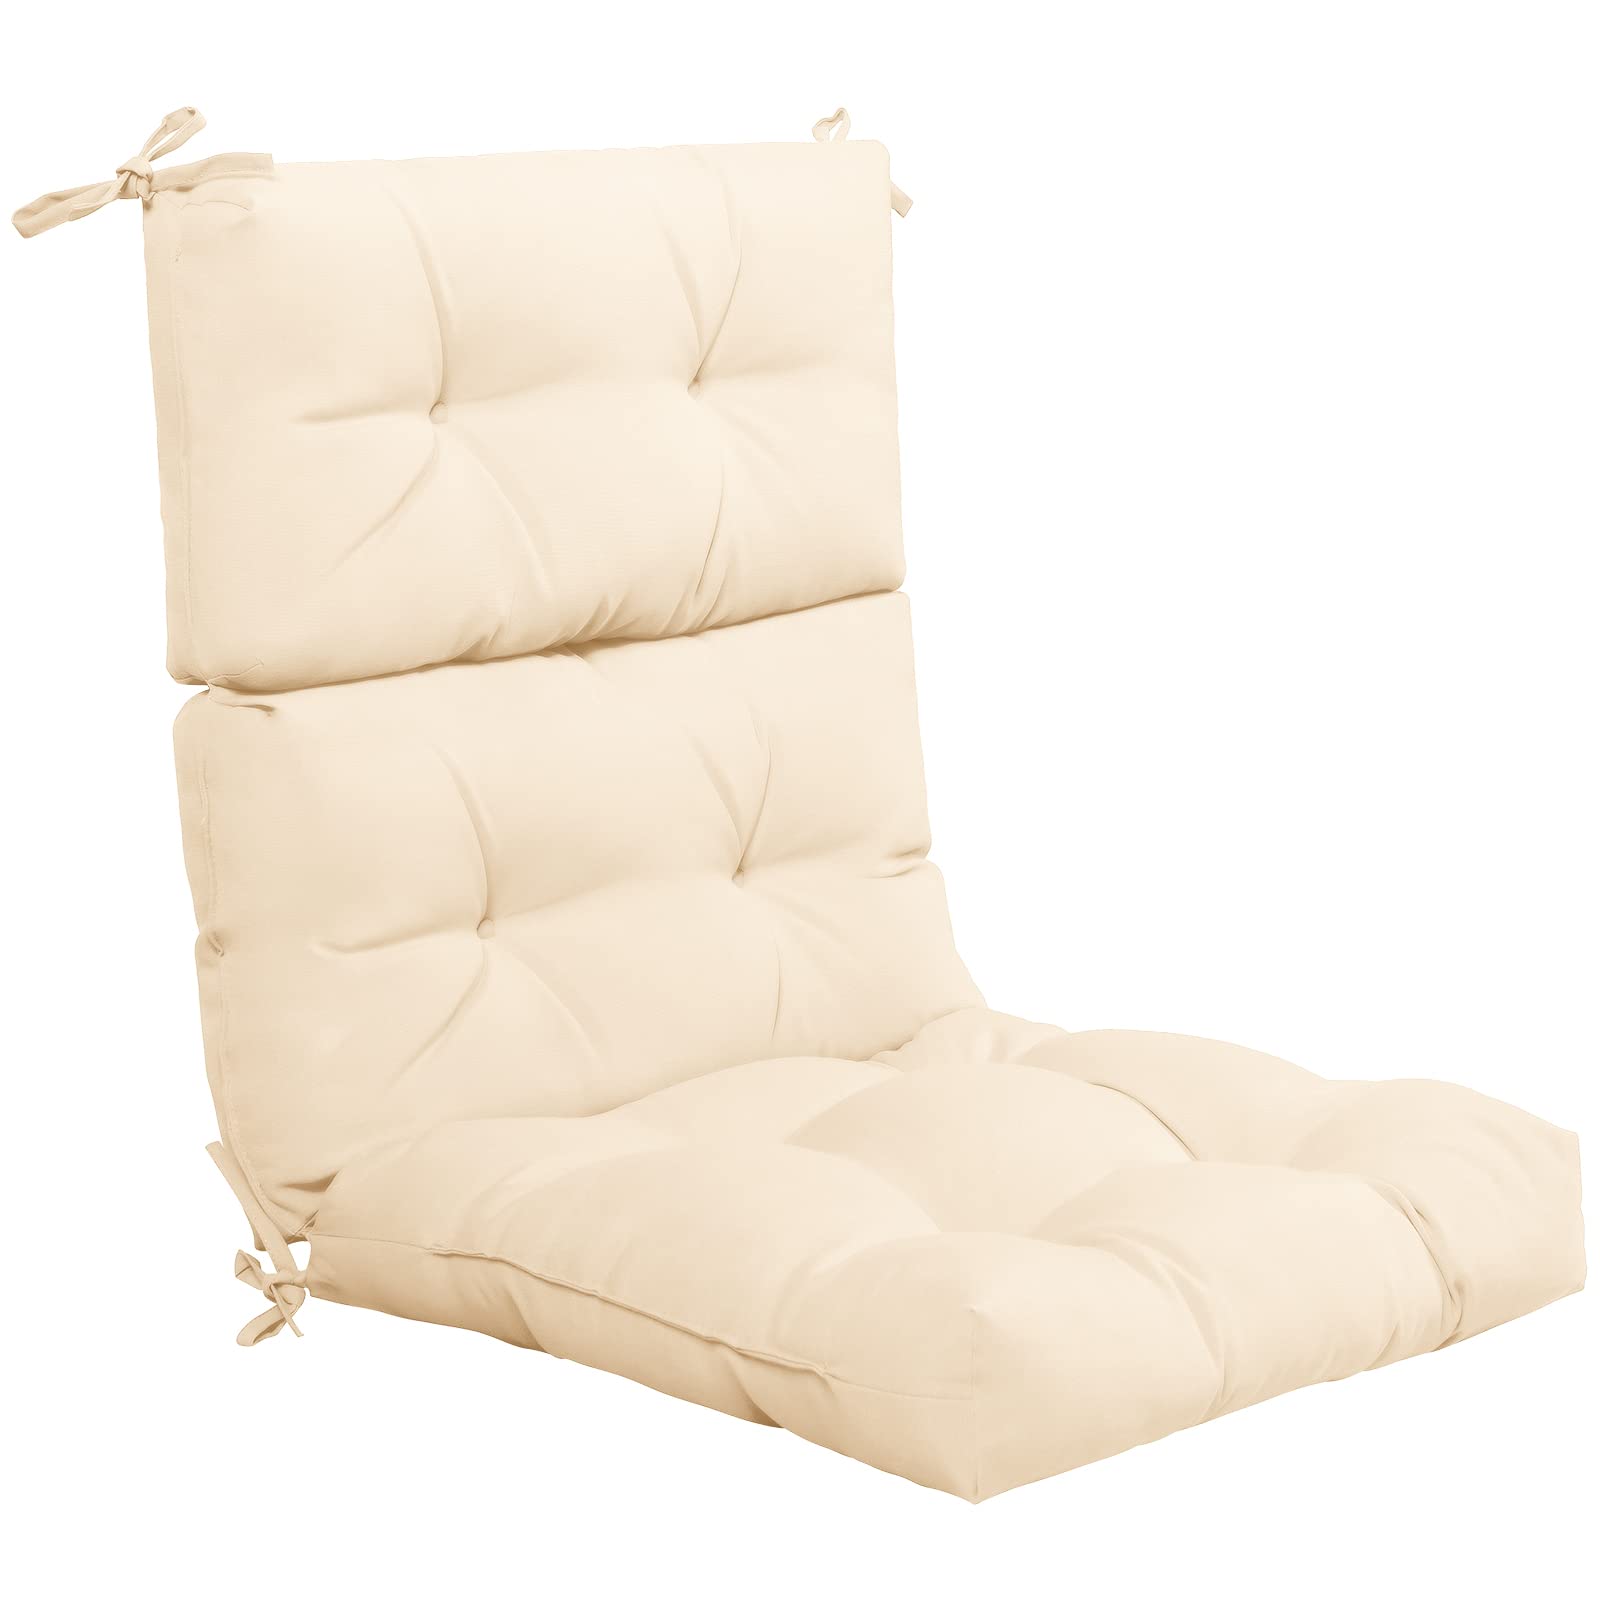 4.5 Inch Thick Outdoor High Back Chair Pads | Tufted Patio Cushion